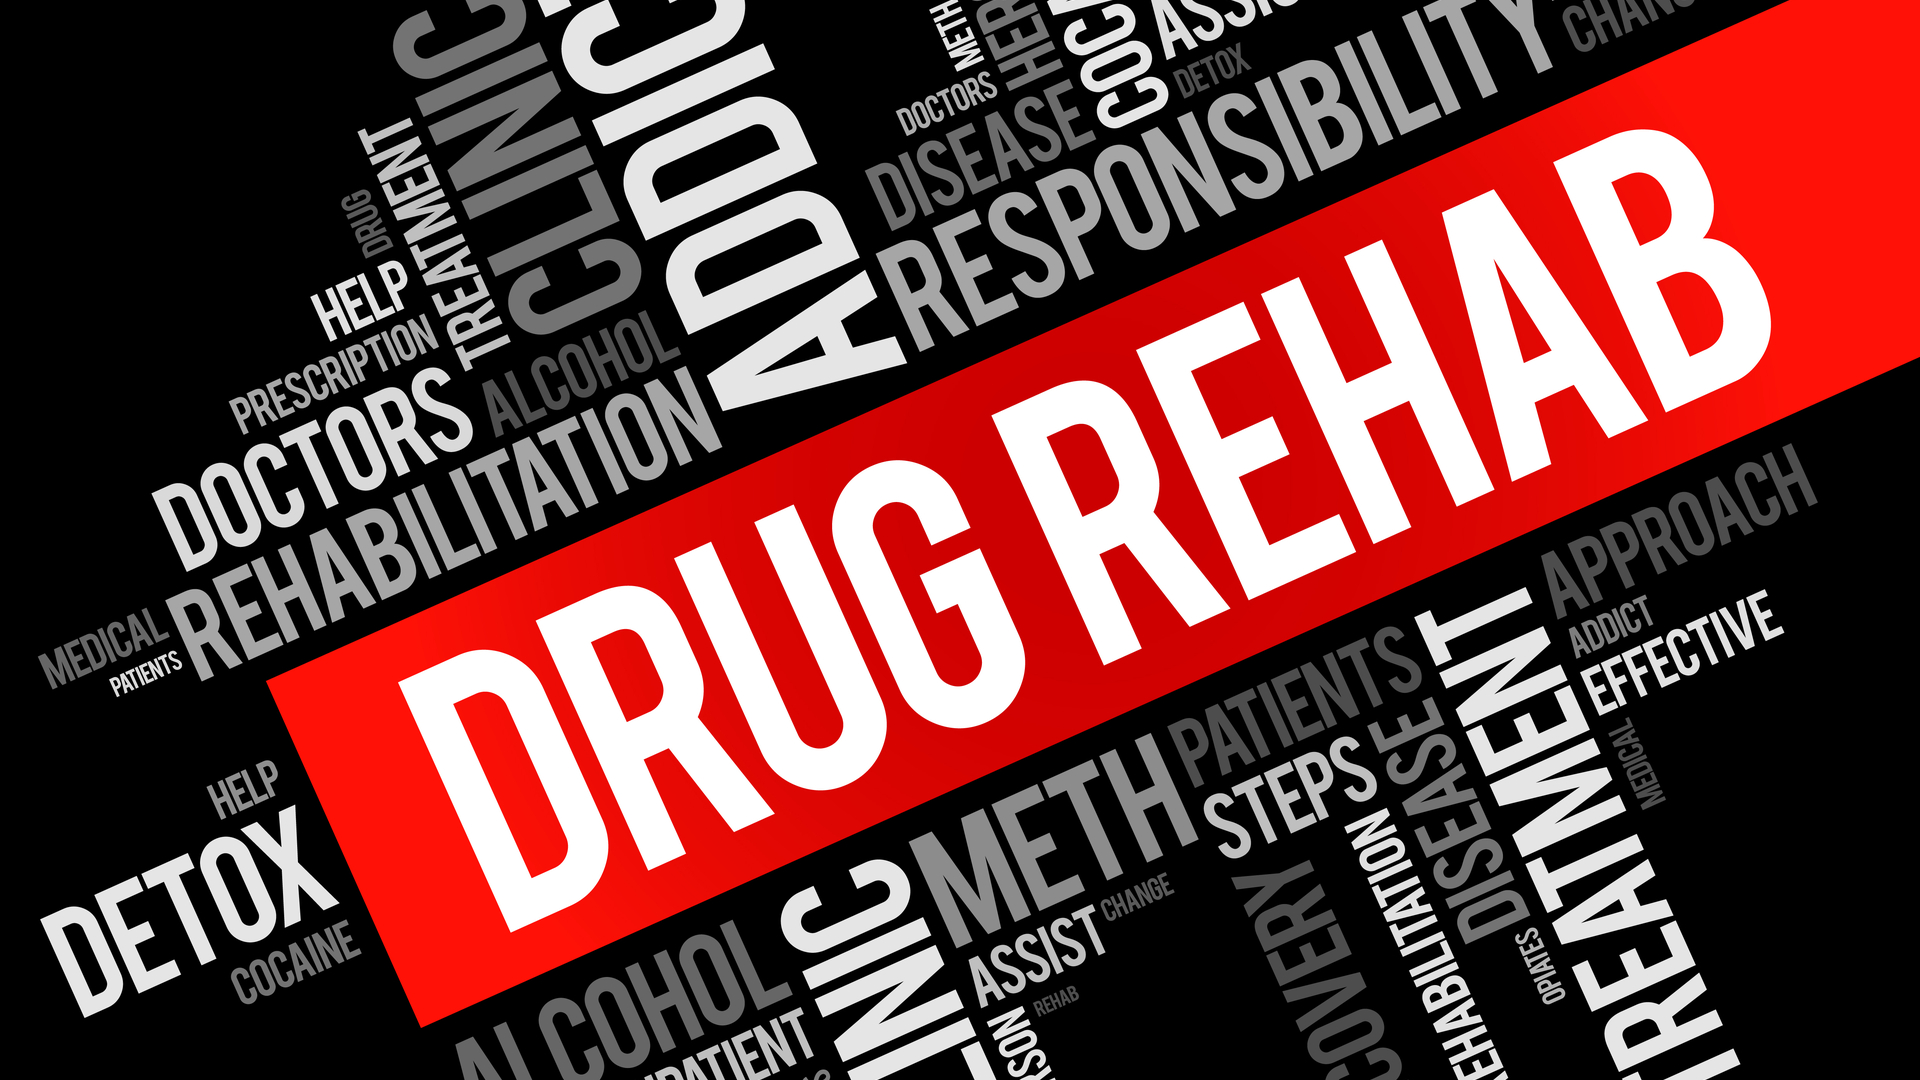 TERMS RELATING TO OPIATE ADDICTION